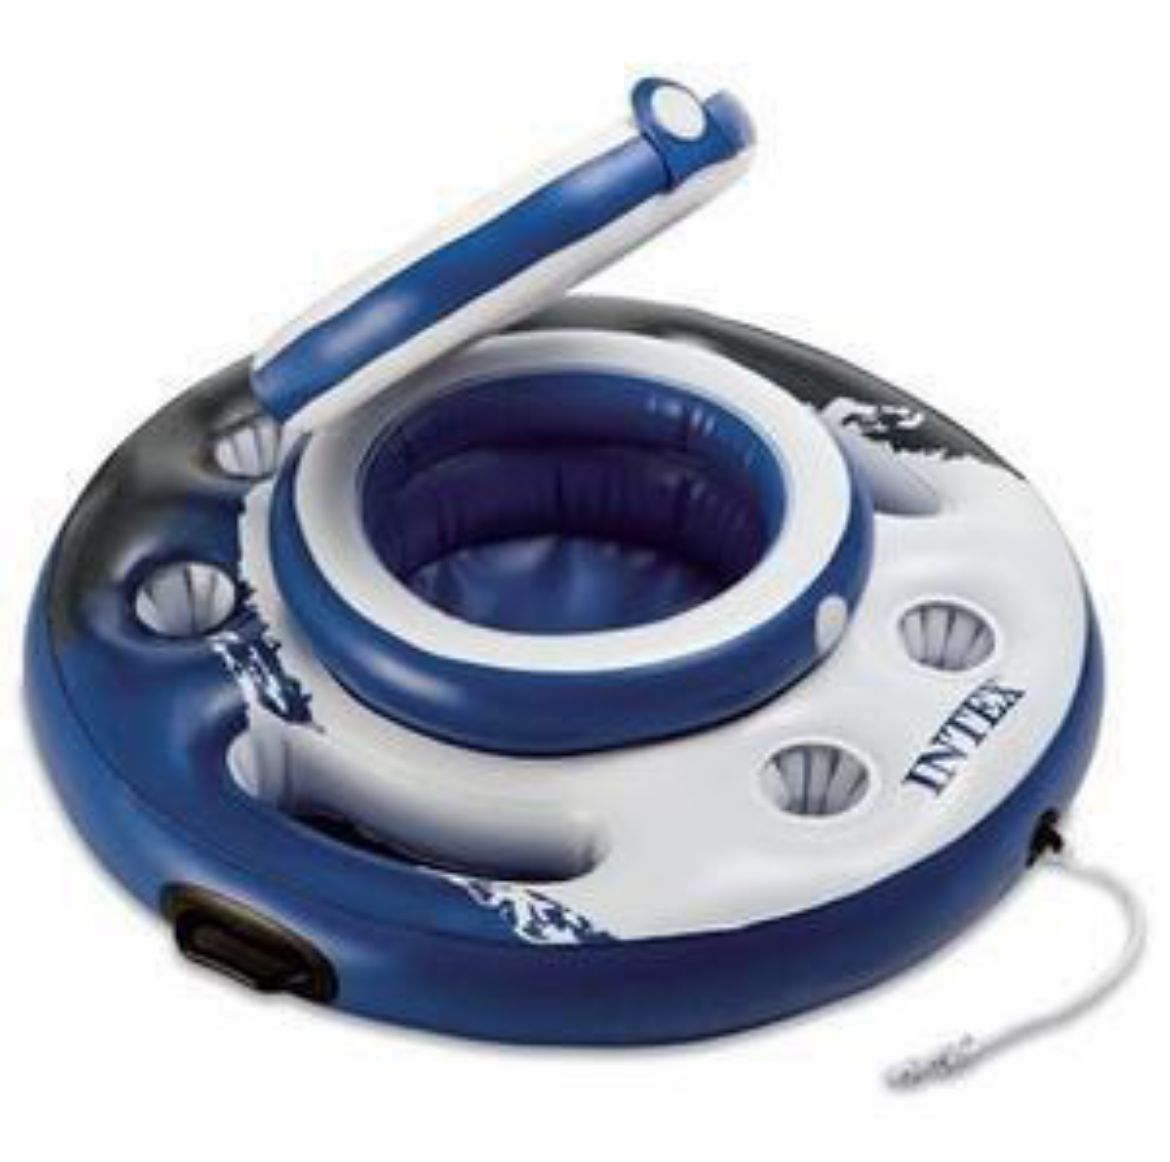 Picture of Intex Mega Chill Inflatable Floating Cooler